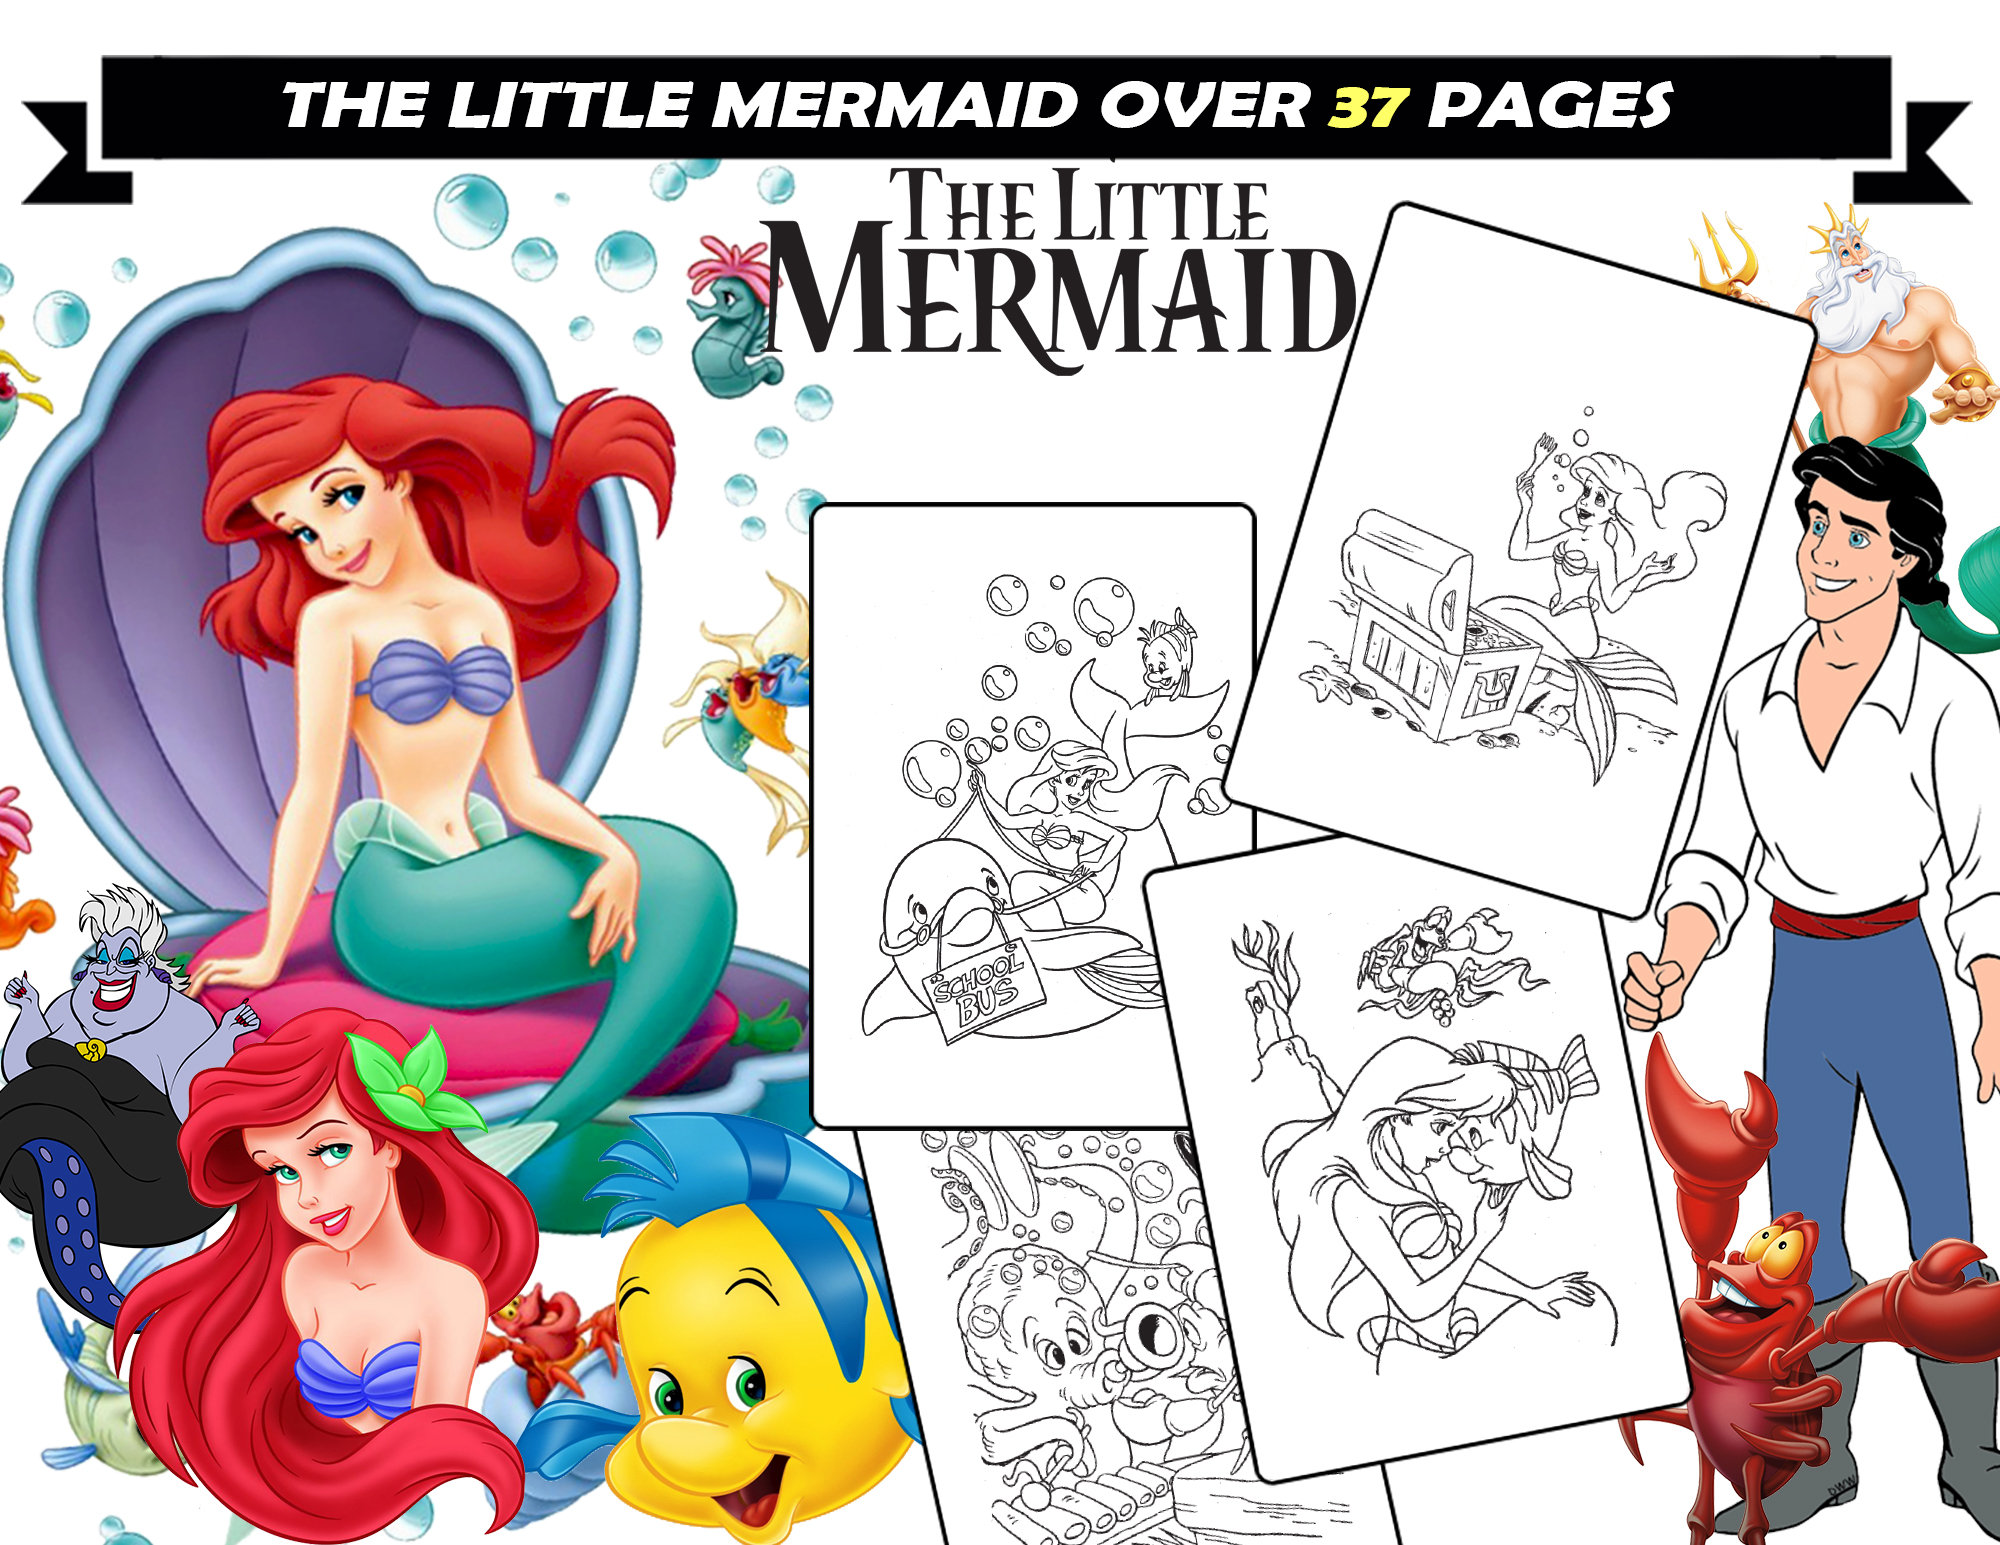 Little mermaid coloring book for kids ariel sebastian flounder ursula coloring sheets for girls printable coloring pages for children instant download